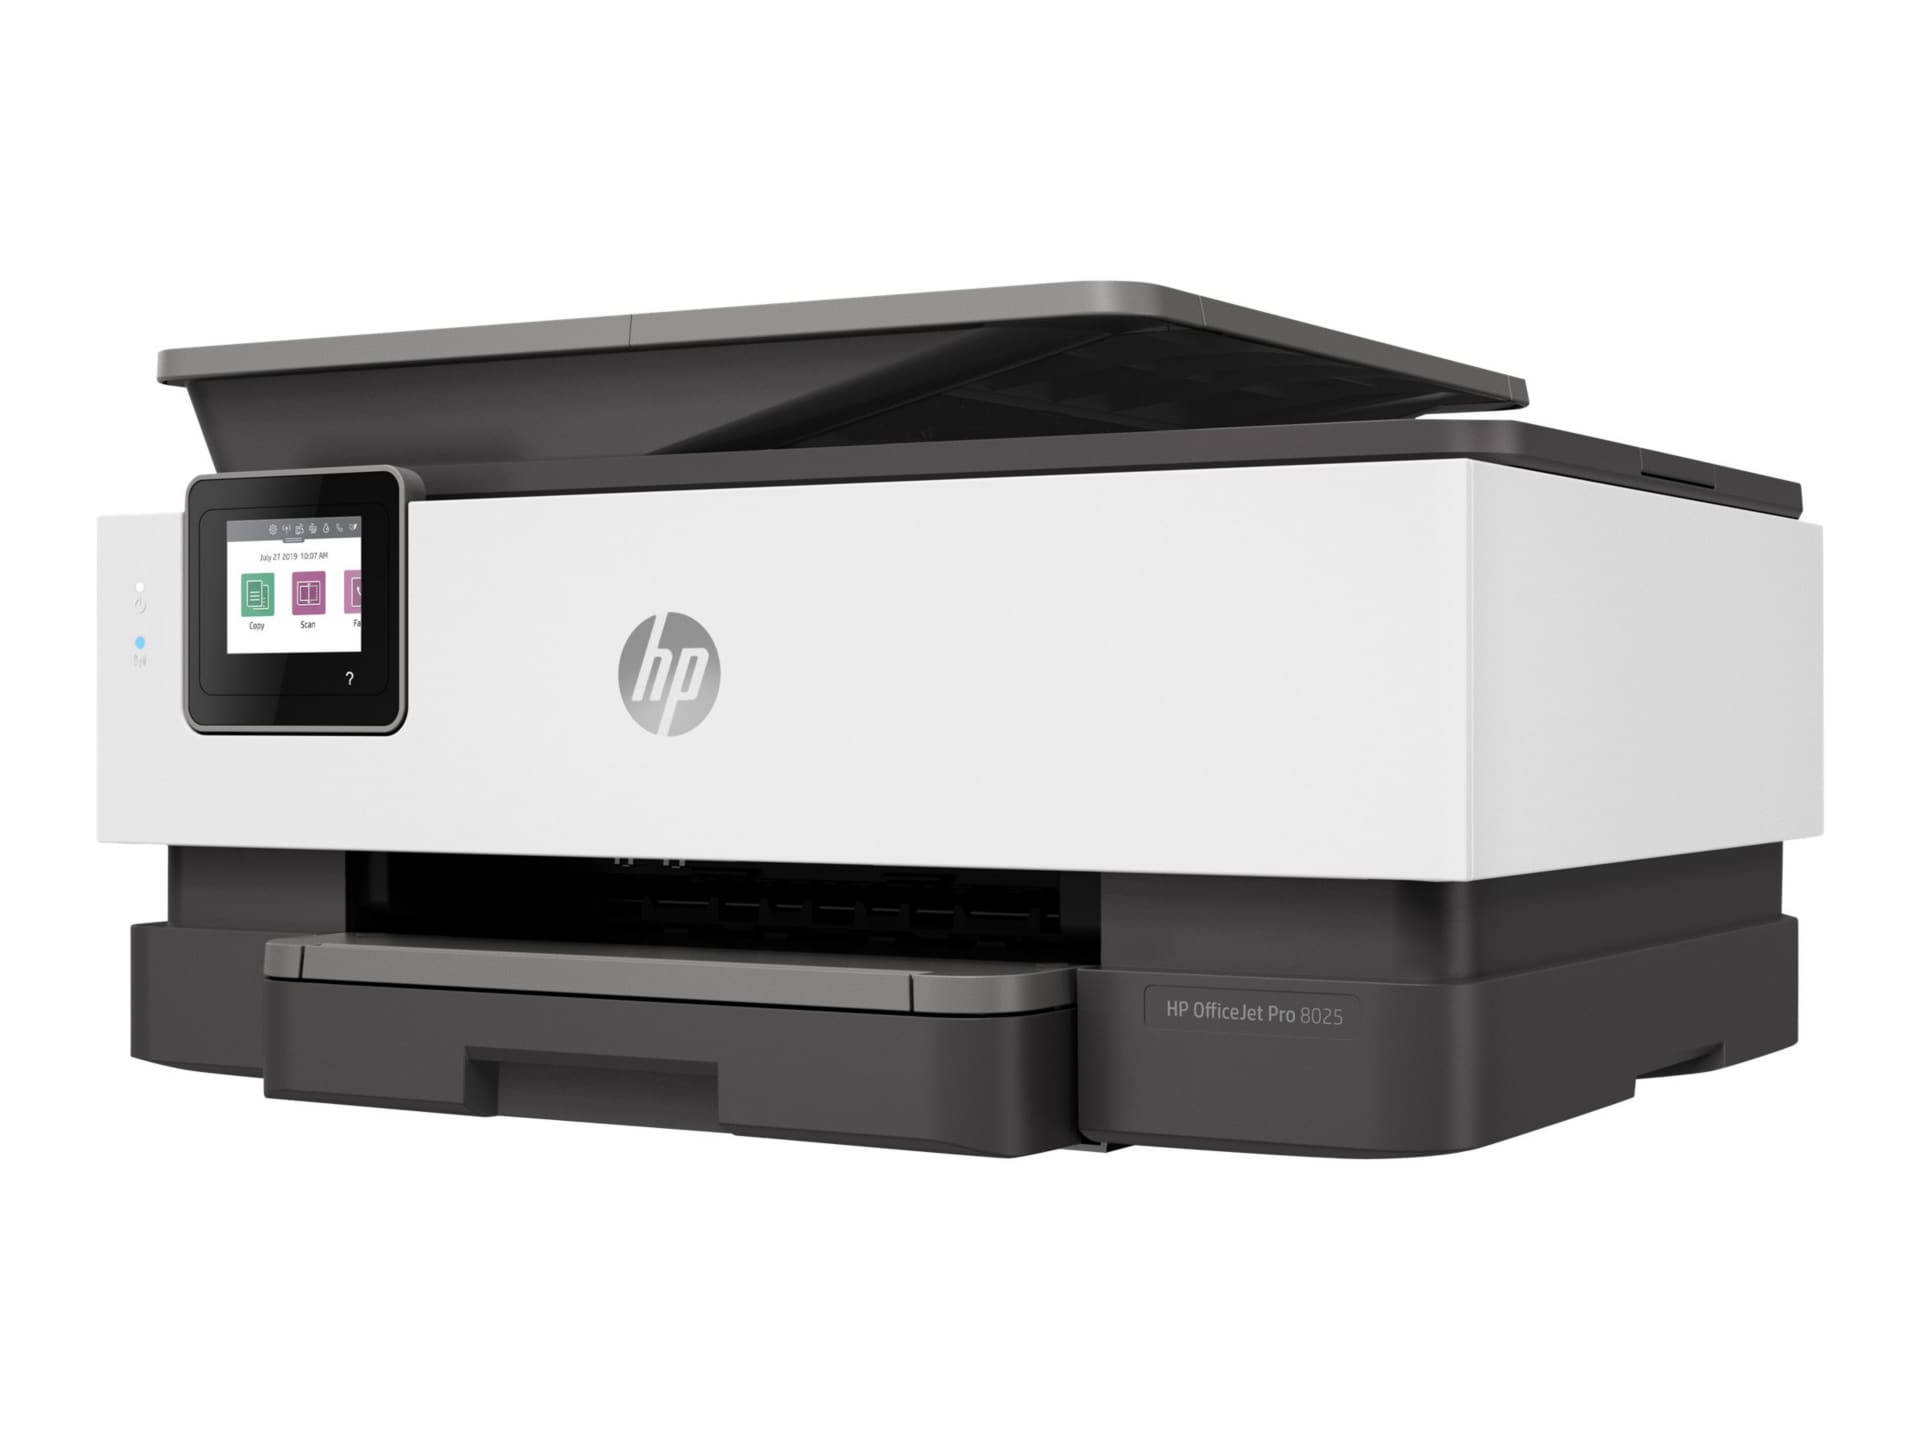 HP Officejet Pro 8025 All-in-One - multifunction printer - color - HP Insta